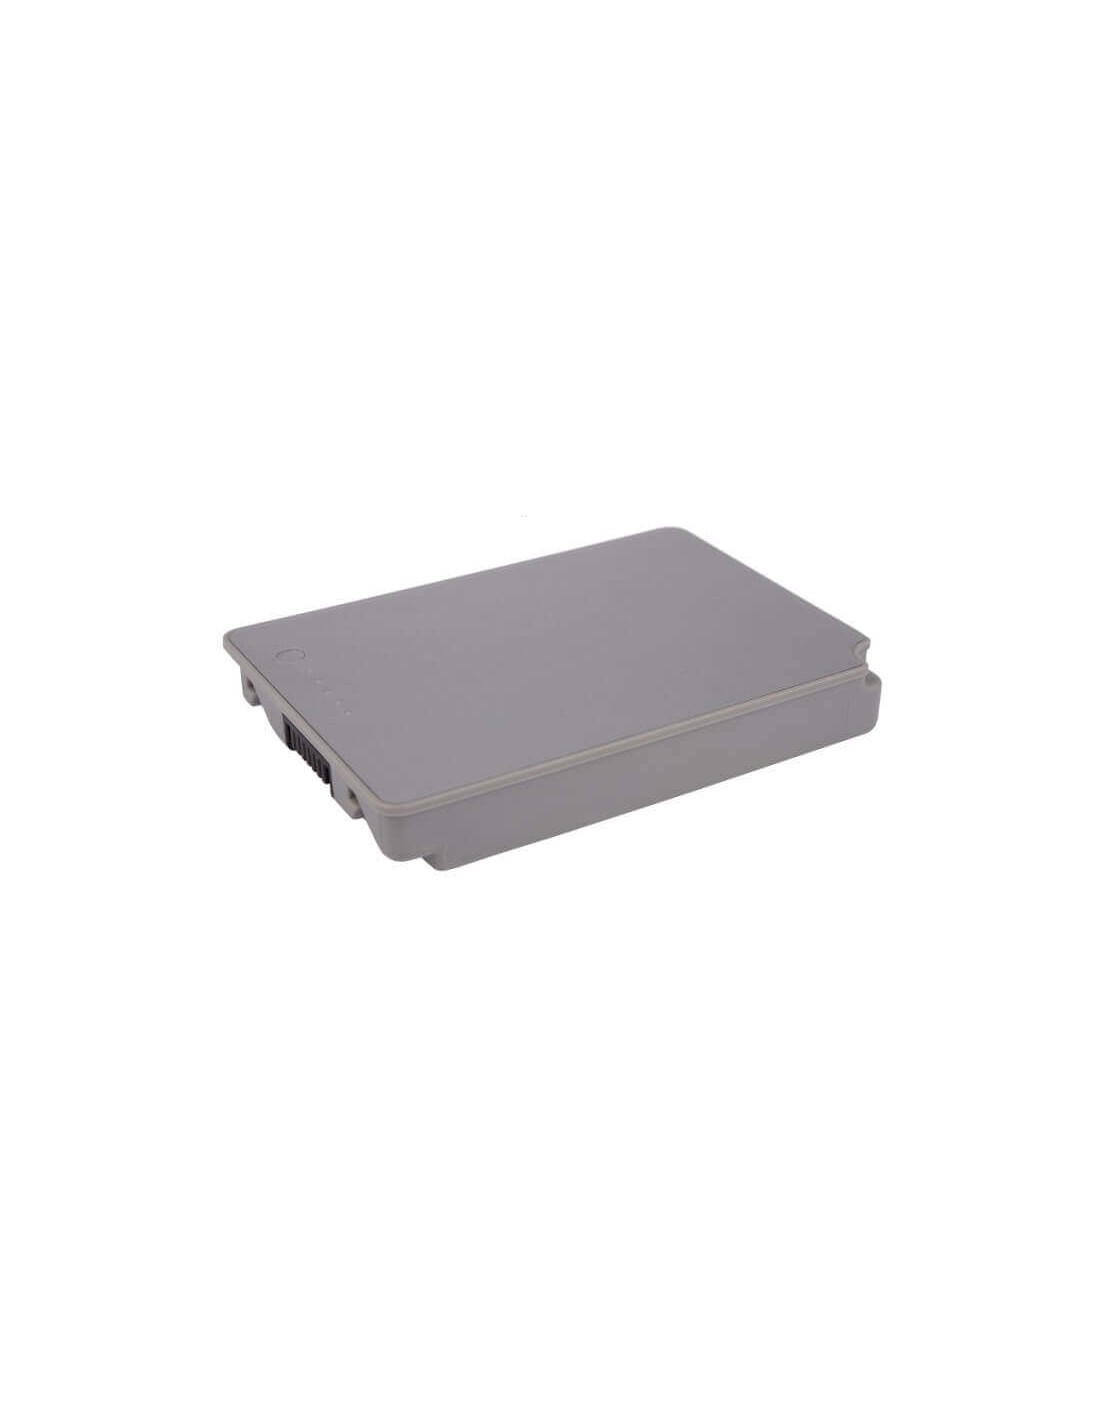 Silver Battery for Apple M9422, M9676*/a, M9676b/a 10.8V, 4400mAh - 47.52Wh